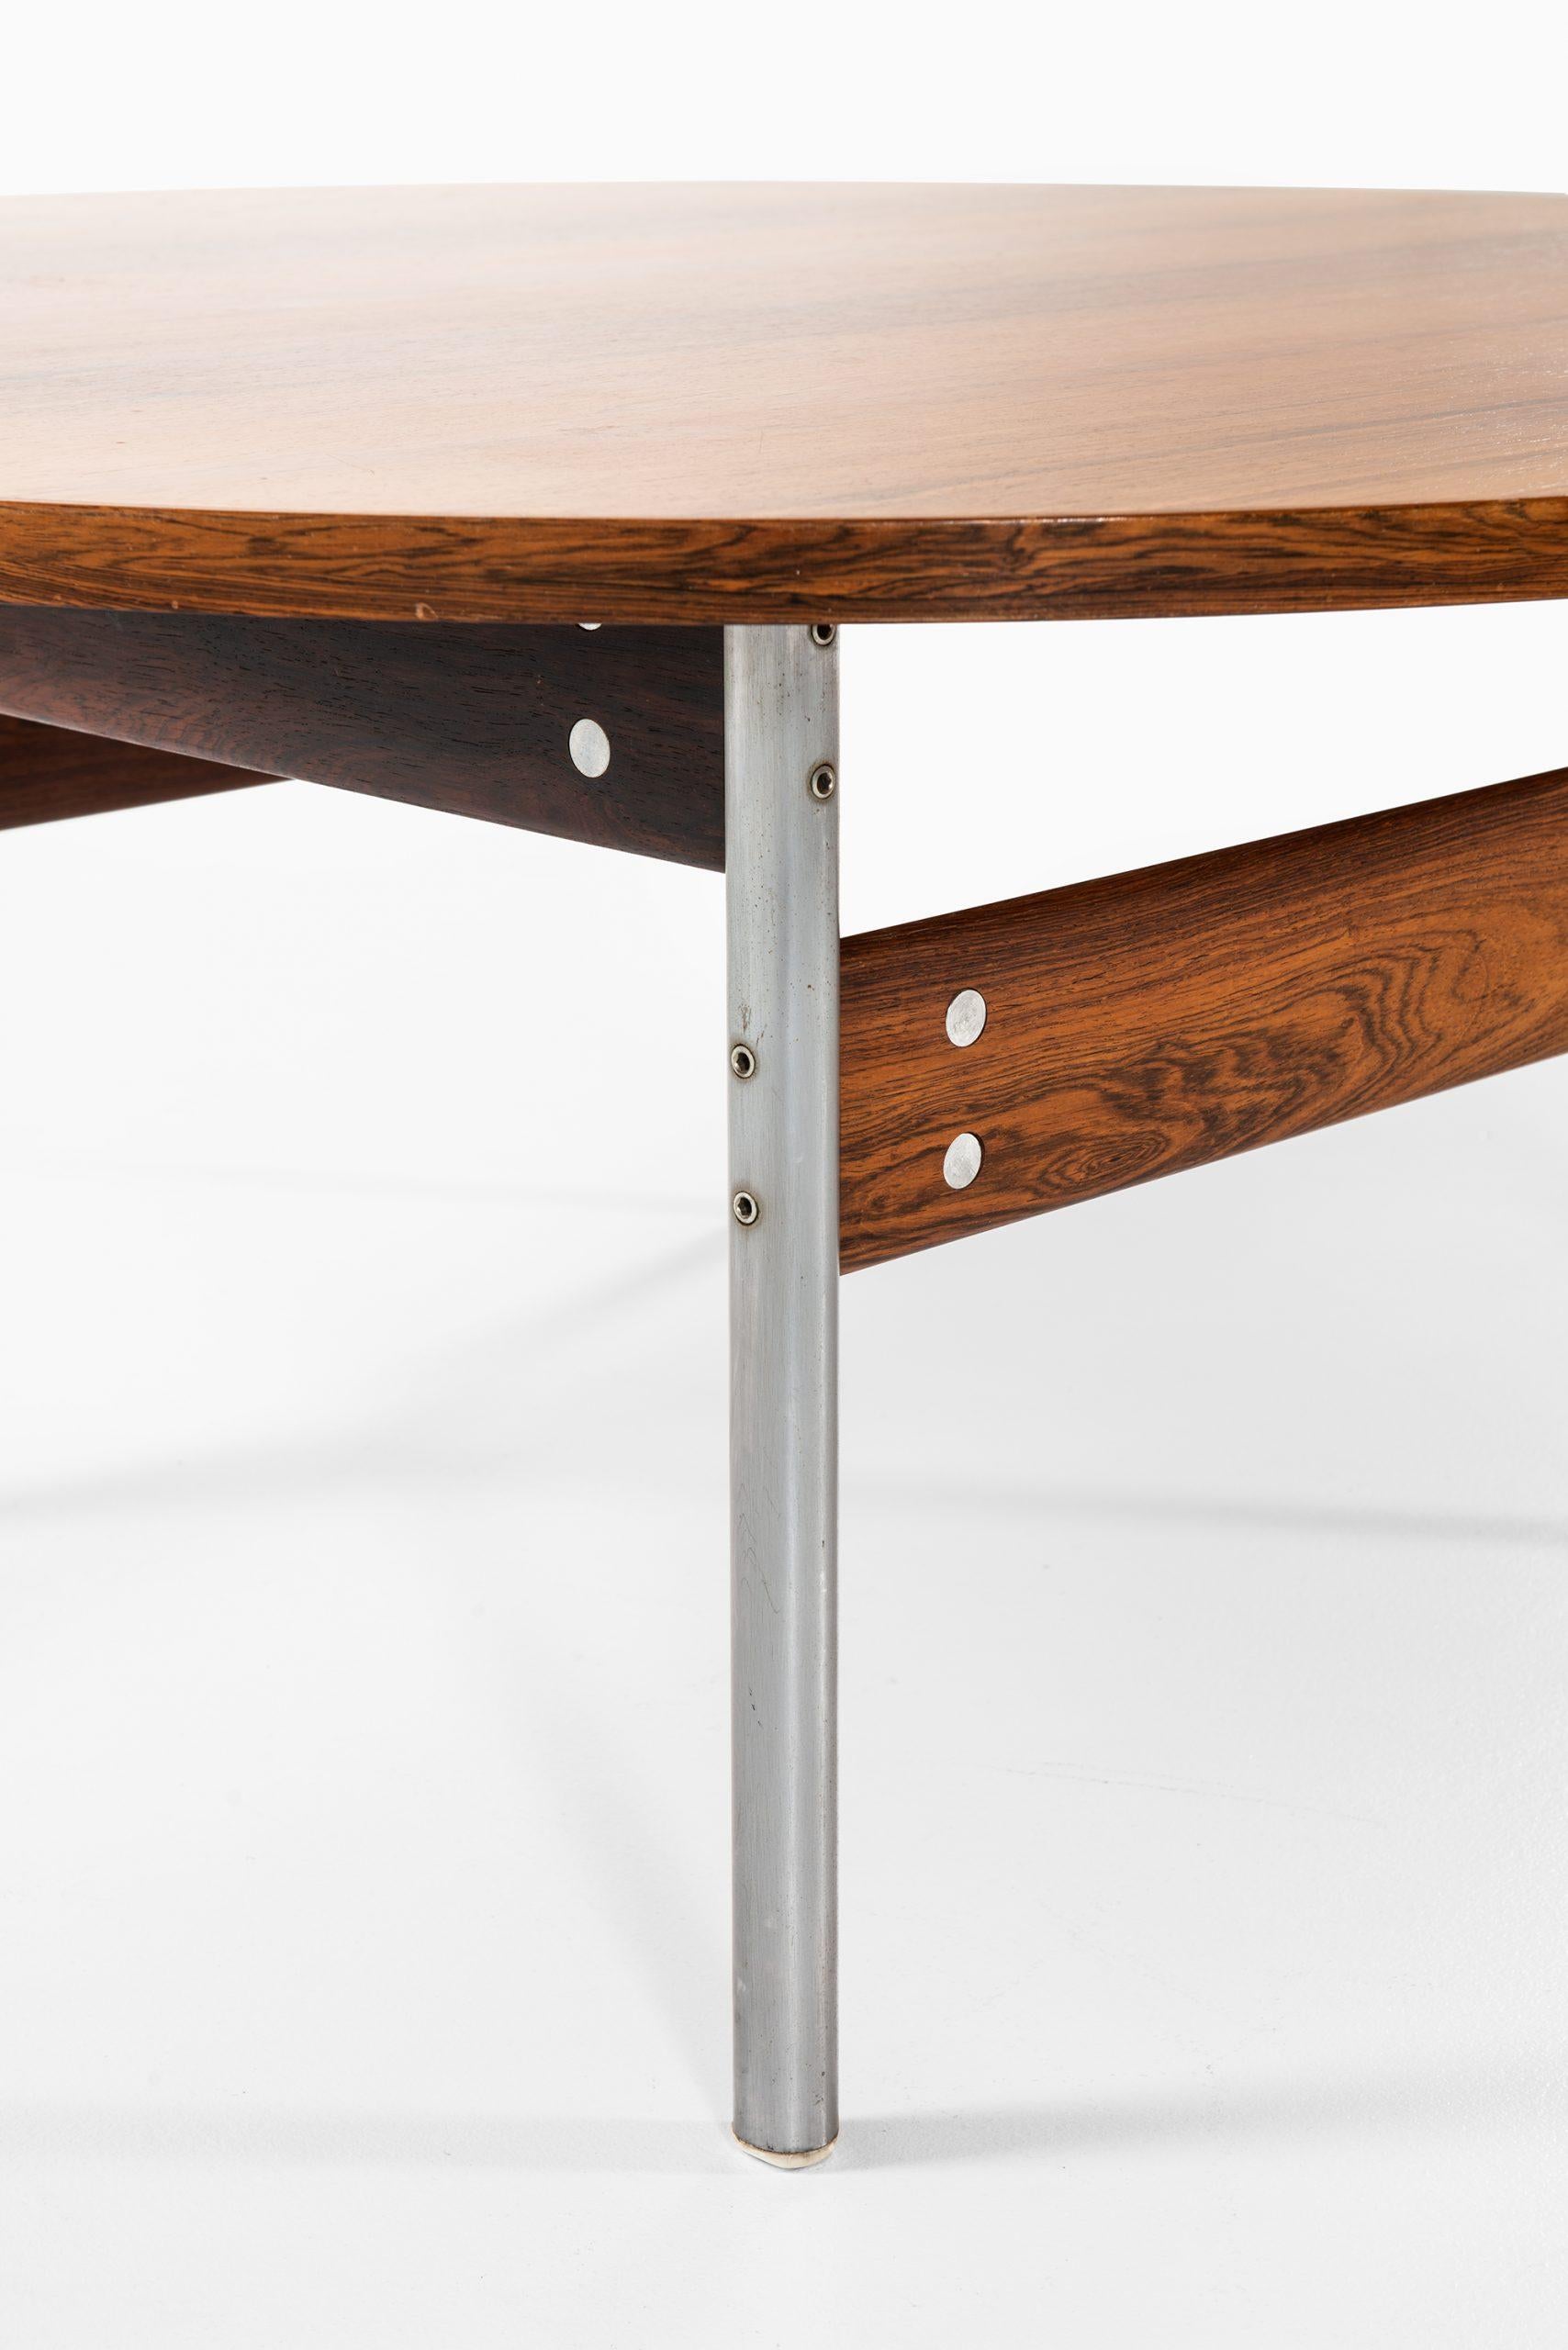 Scandinavian Modern Sven Ivar Dysthe Coffee Table Produced by Dokka Møbler in Norway For Sale